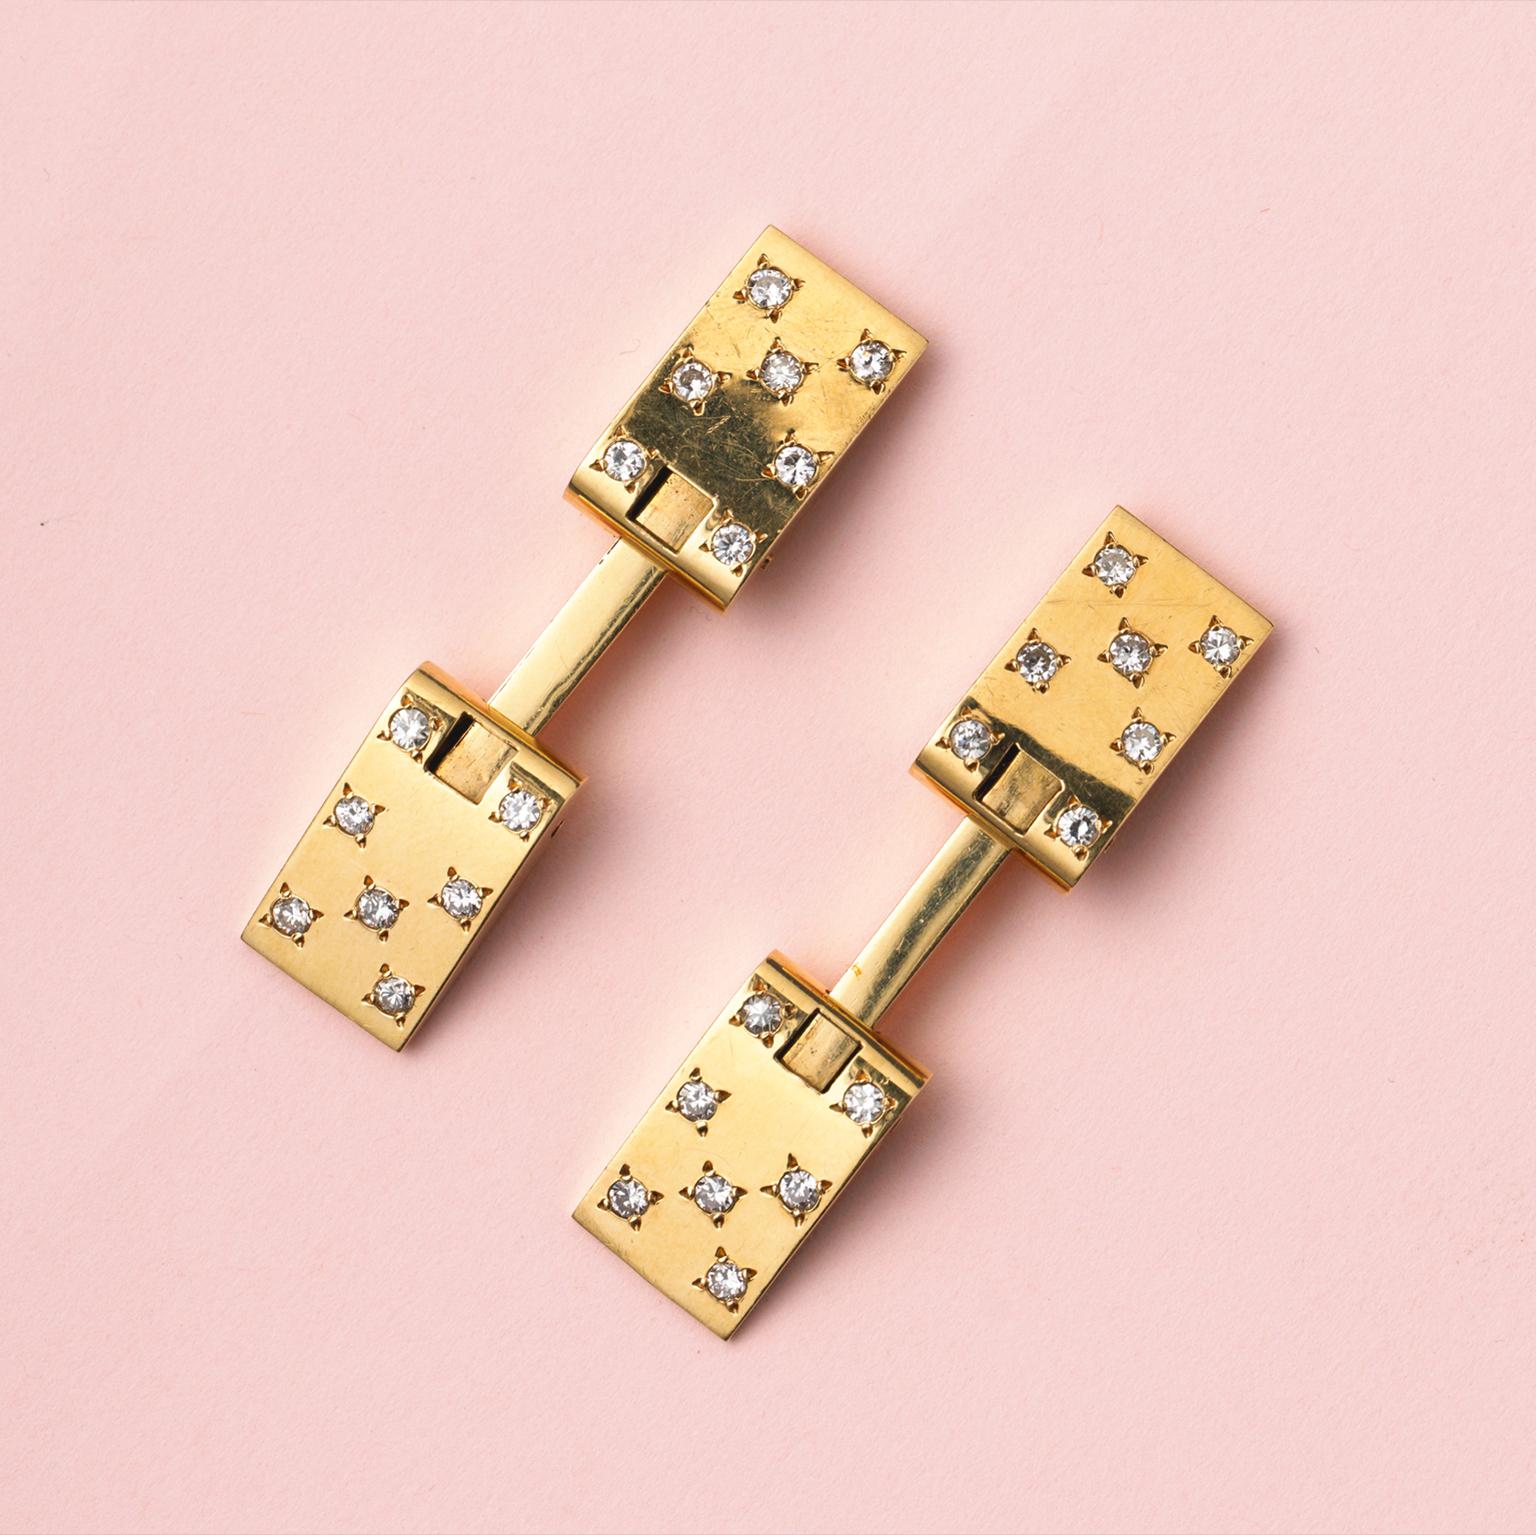 A pair of yellow gold cufflinks set with 14 small brilliant cut diamonds (ap. 1.21 carat in total), France, circa 1960.

weight: 19.97 grams
dimensions: 1.7 x 1.0 cm